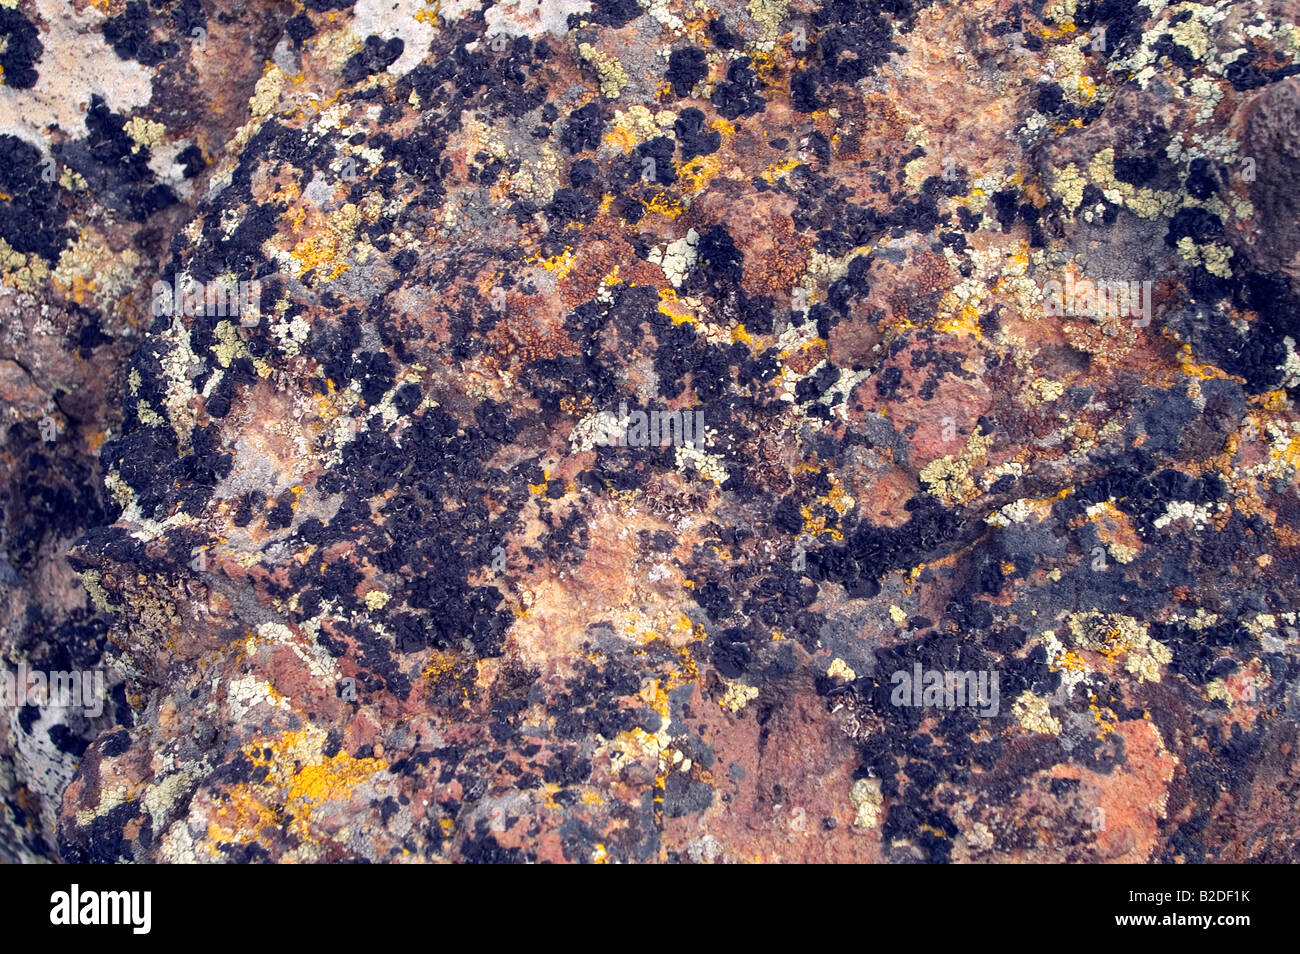 Rock Texture Rust and Black agate Stock Photo